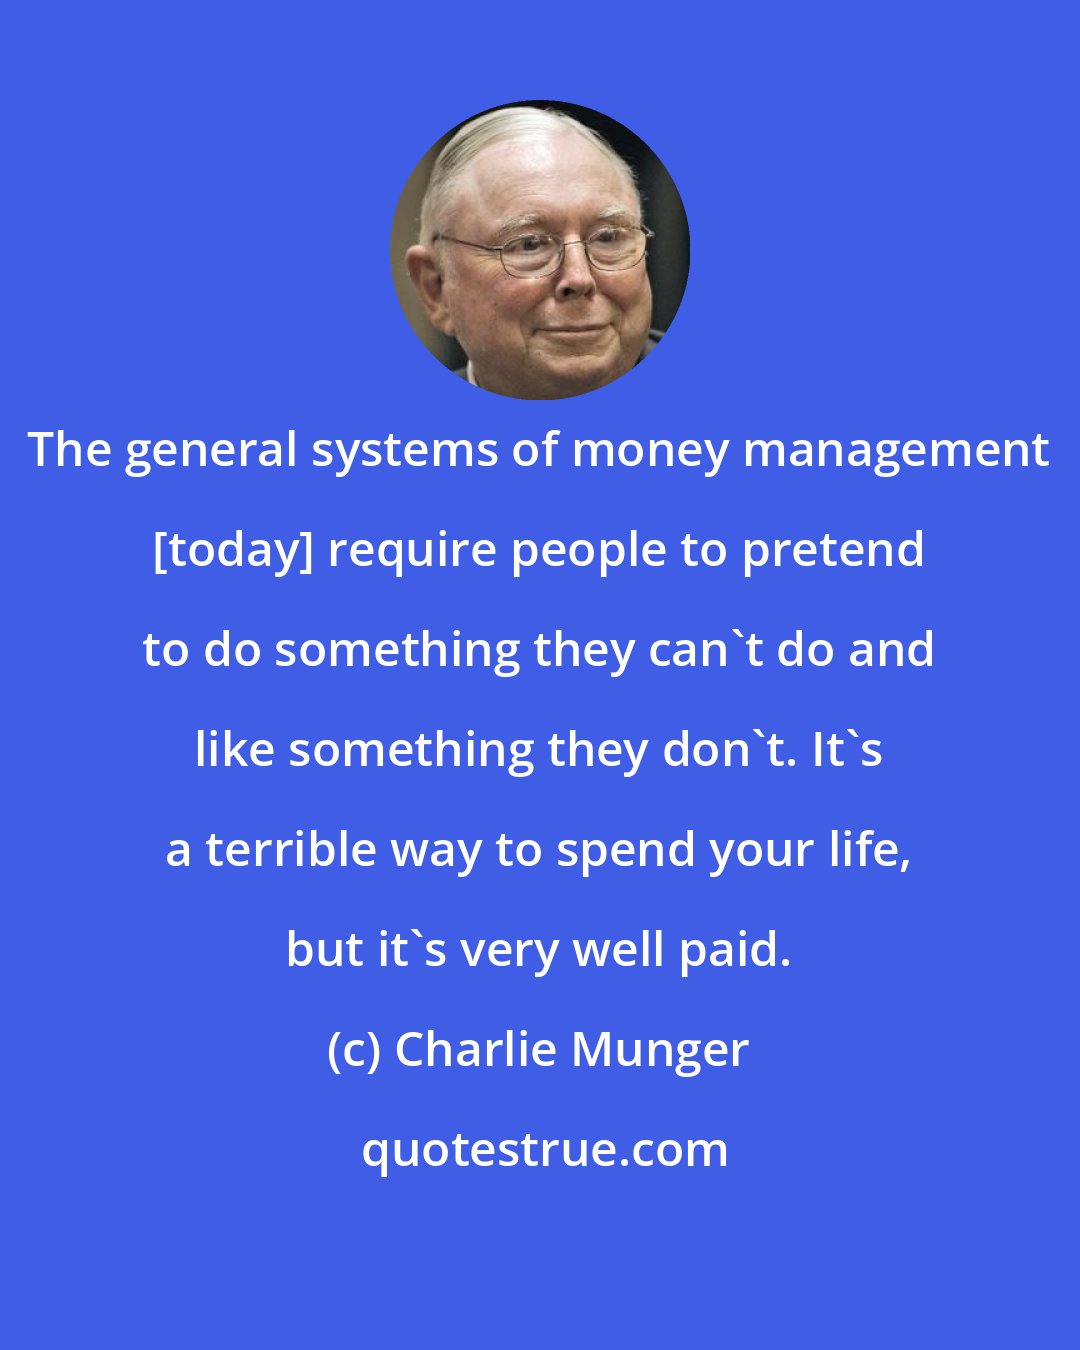 Charlie Munger: The general systems of money management [today] require people to pretend to do something they can't do and like something they don't. It's a terrible way to spend your life, but it's very well paid.